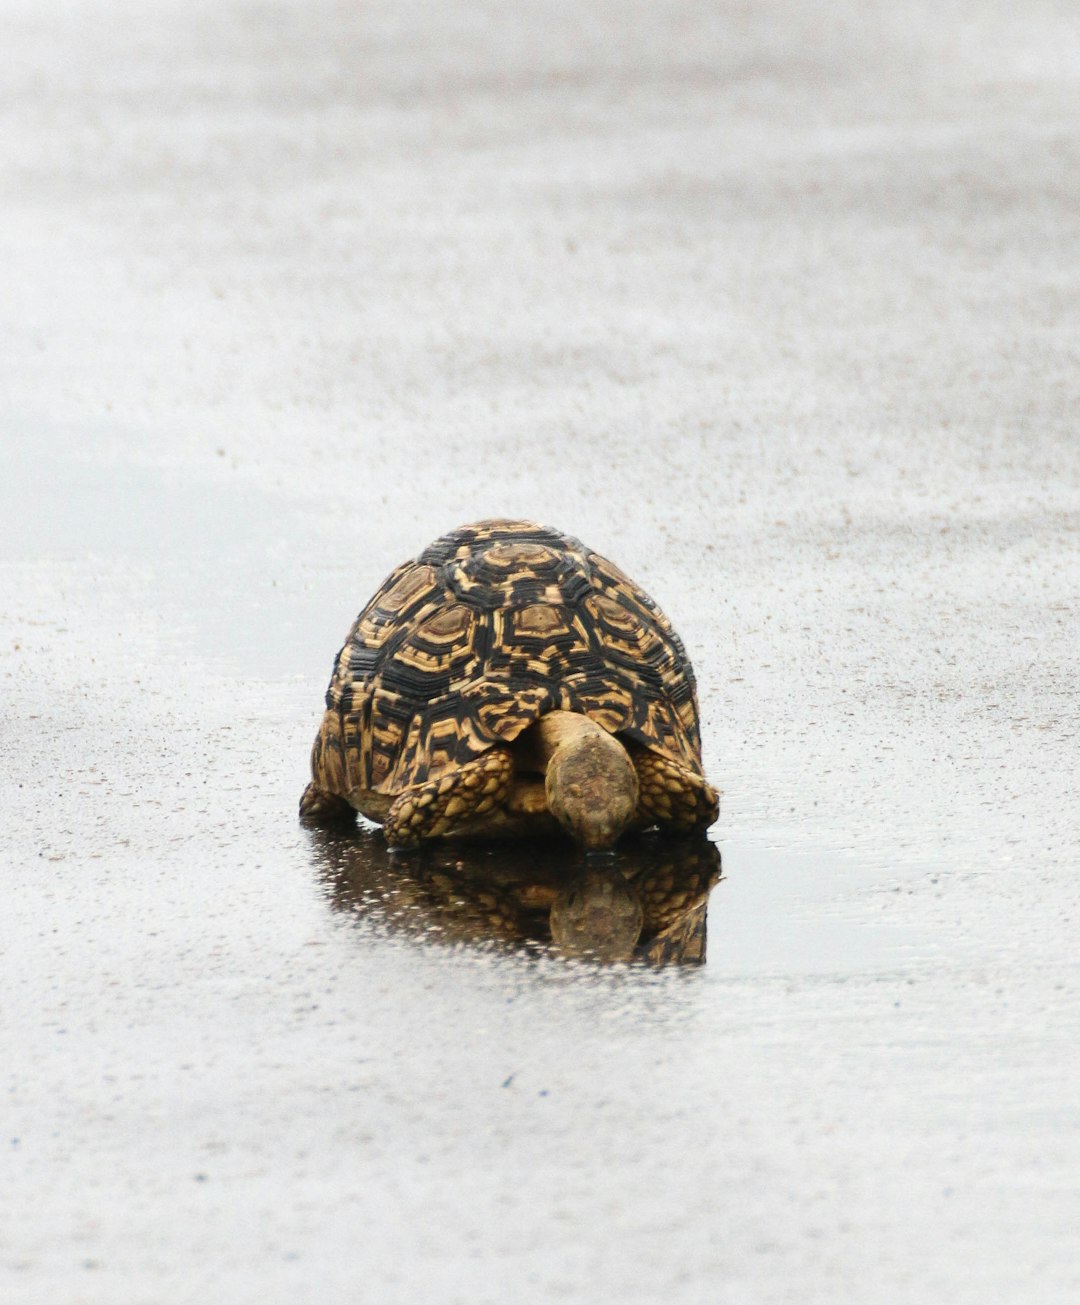 brown and black turtle on white snow